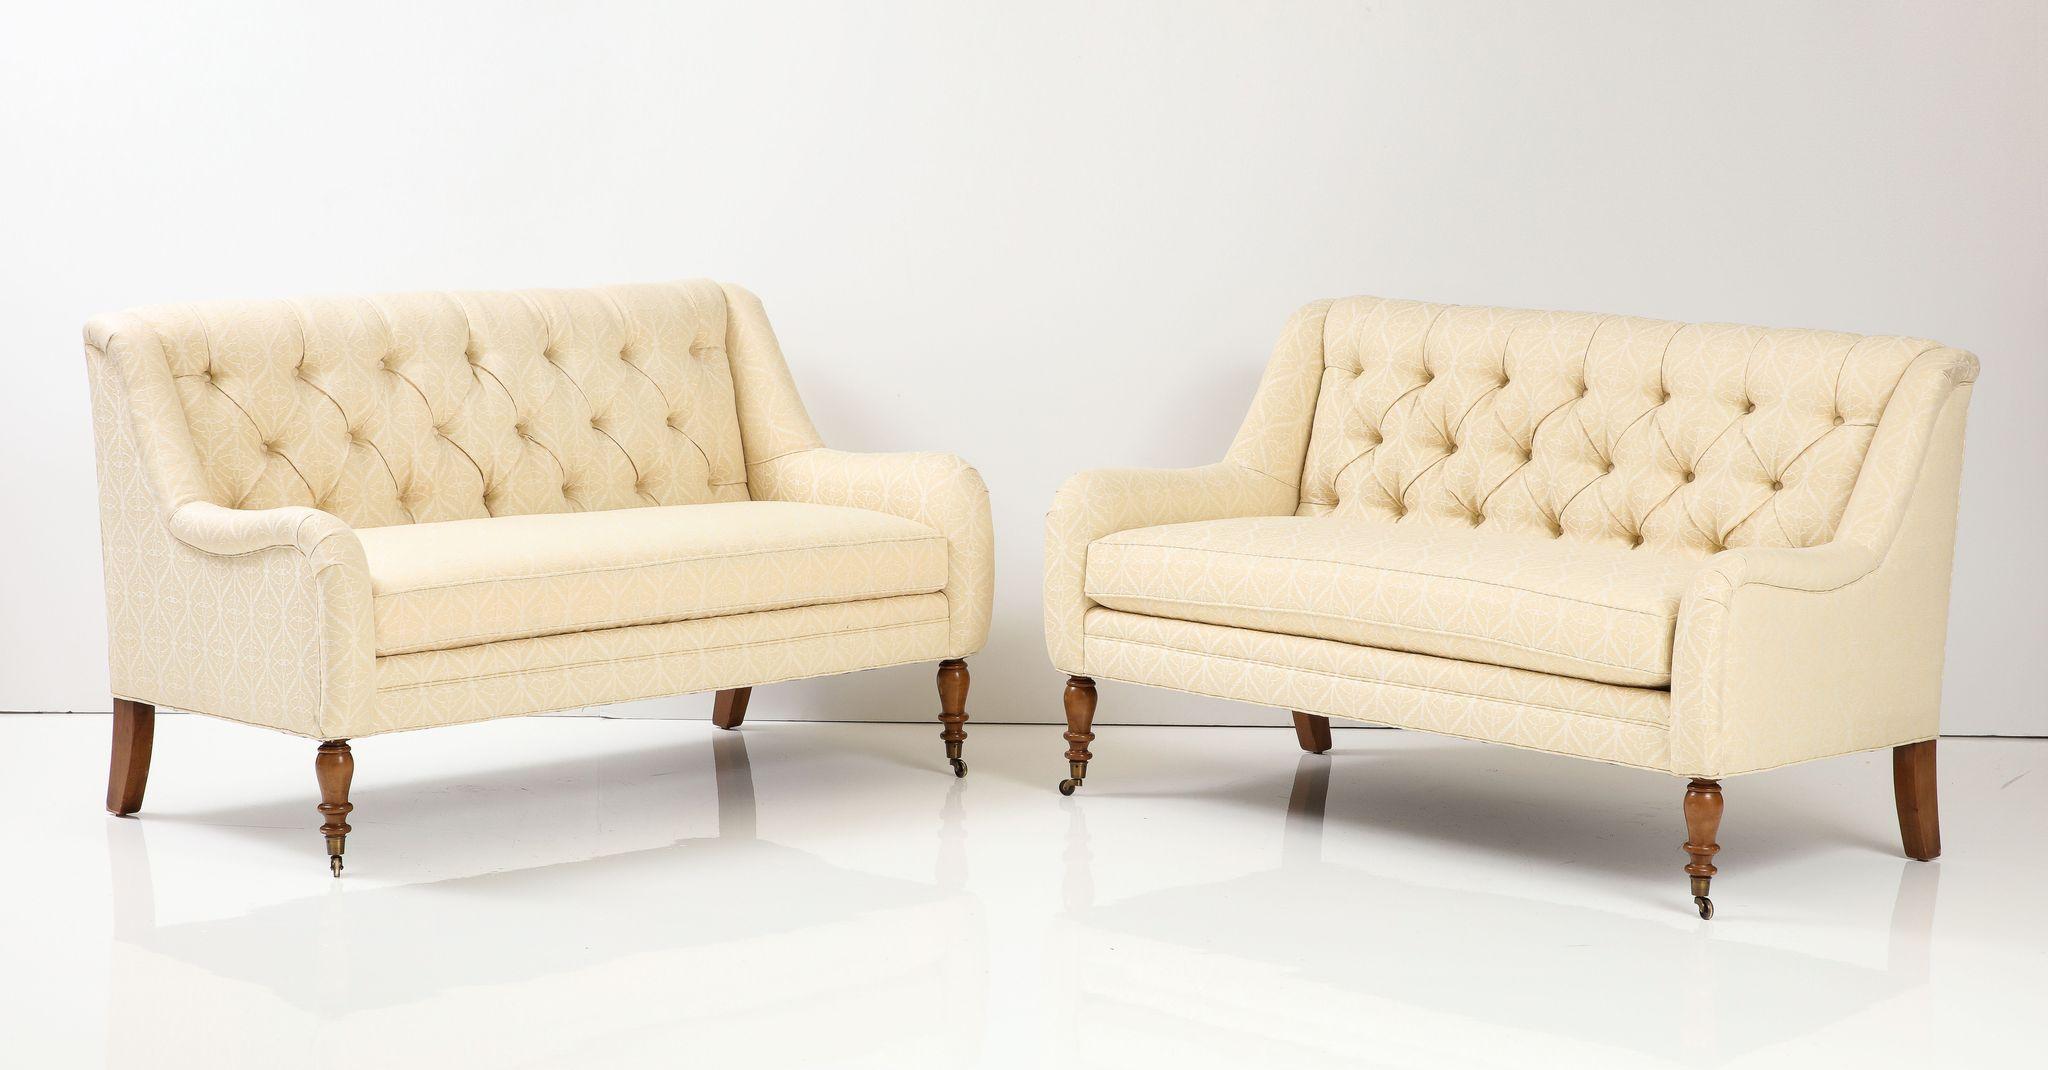 Pair of Tufted Loveseats In Excellent Condition For Sale In New York, NY